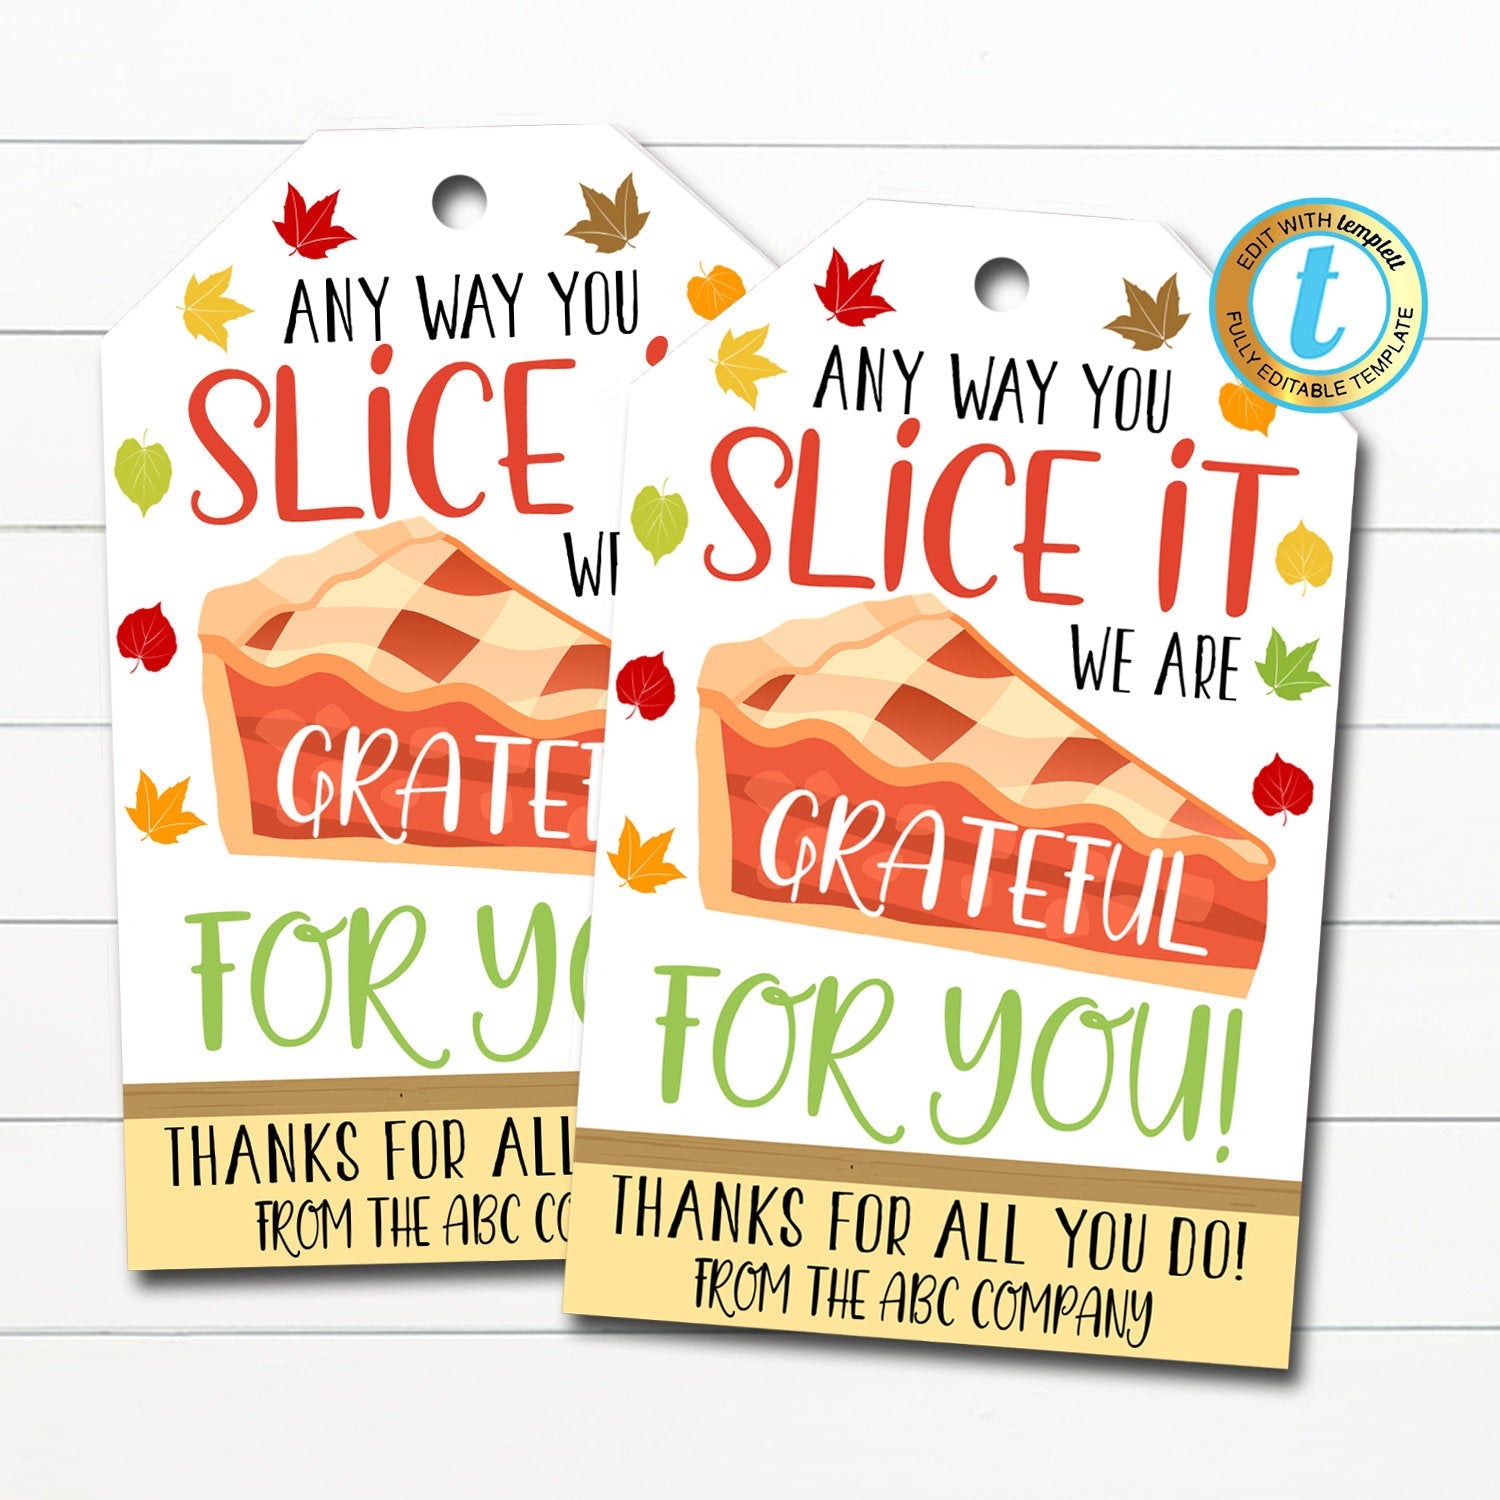 TidyLady　Grateful　You　Gift　—　For　Label　Printables　Apple　Tags,　Thanksgiving　Pie